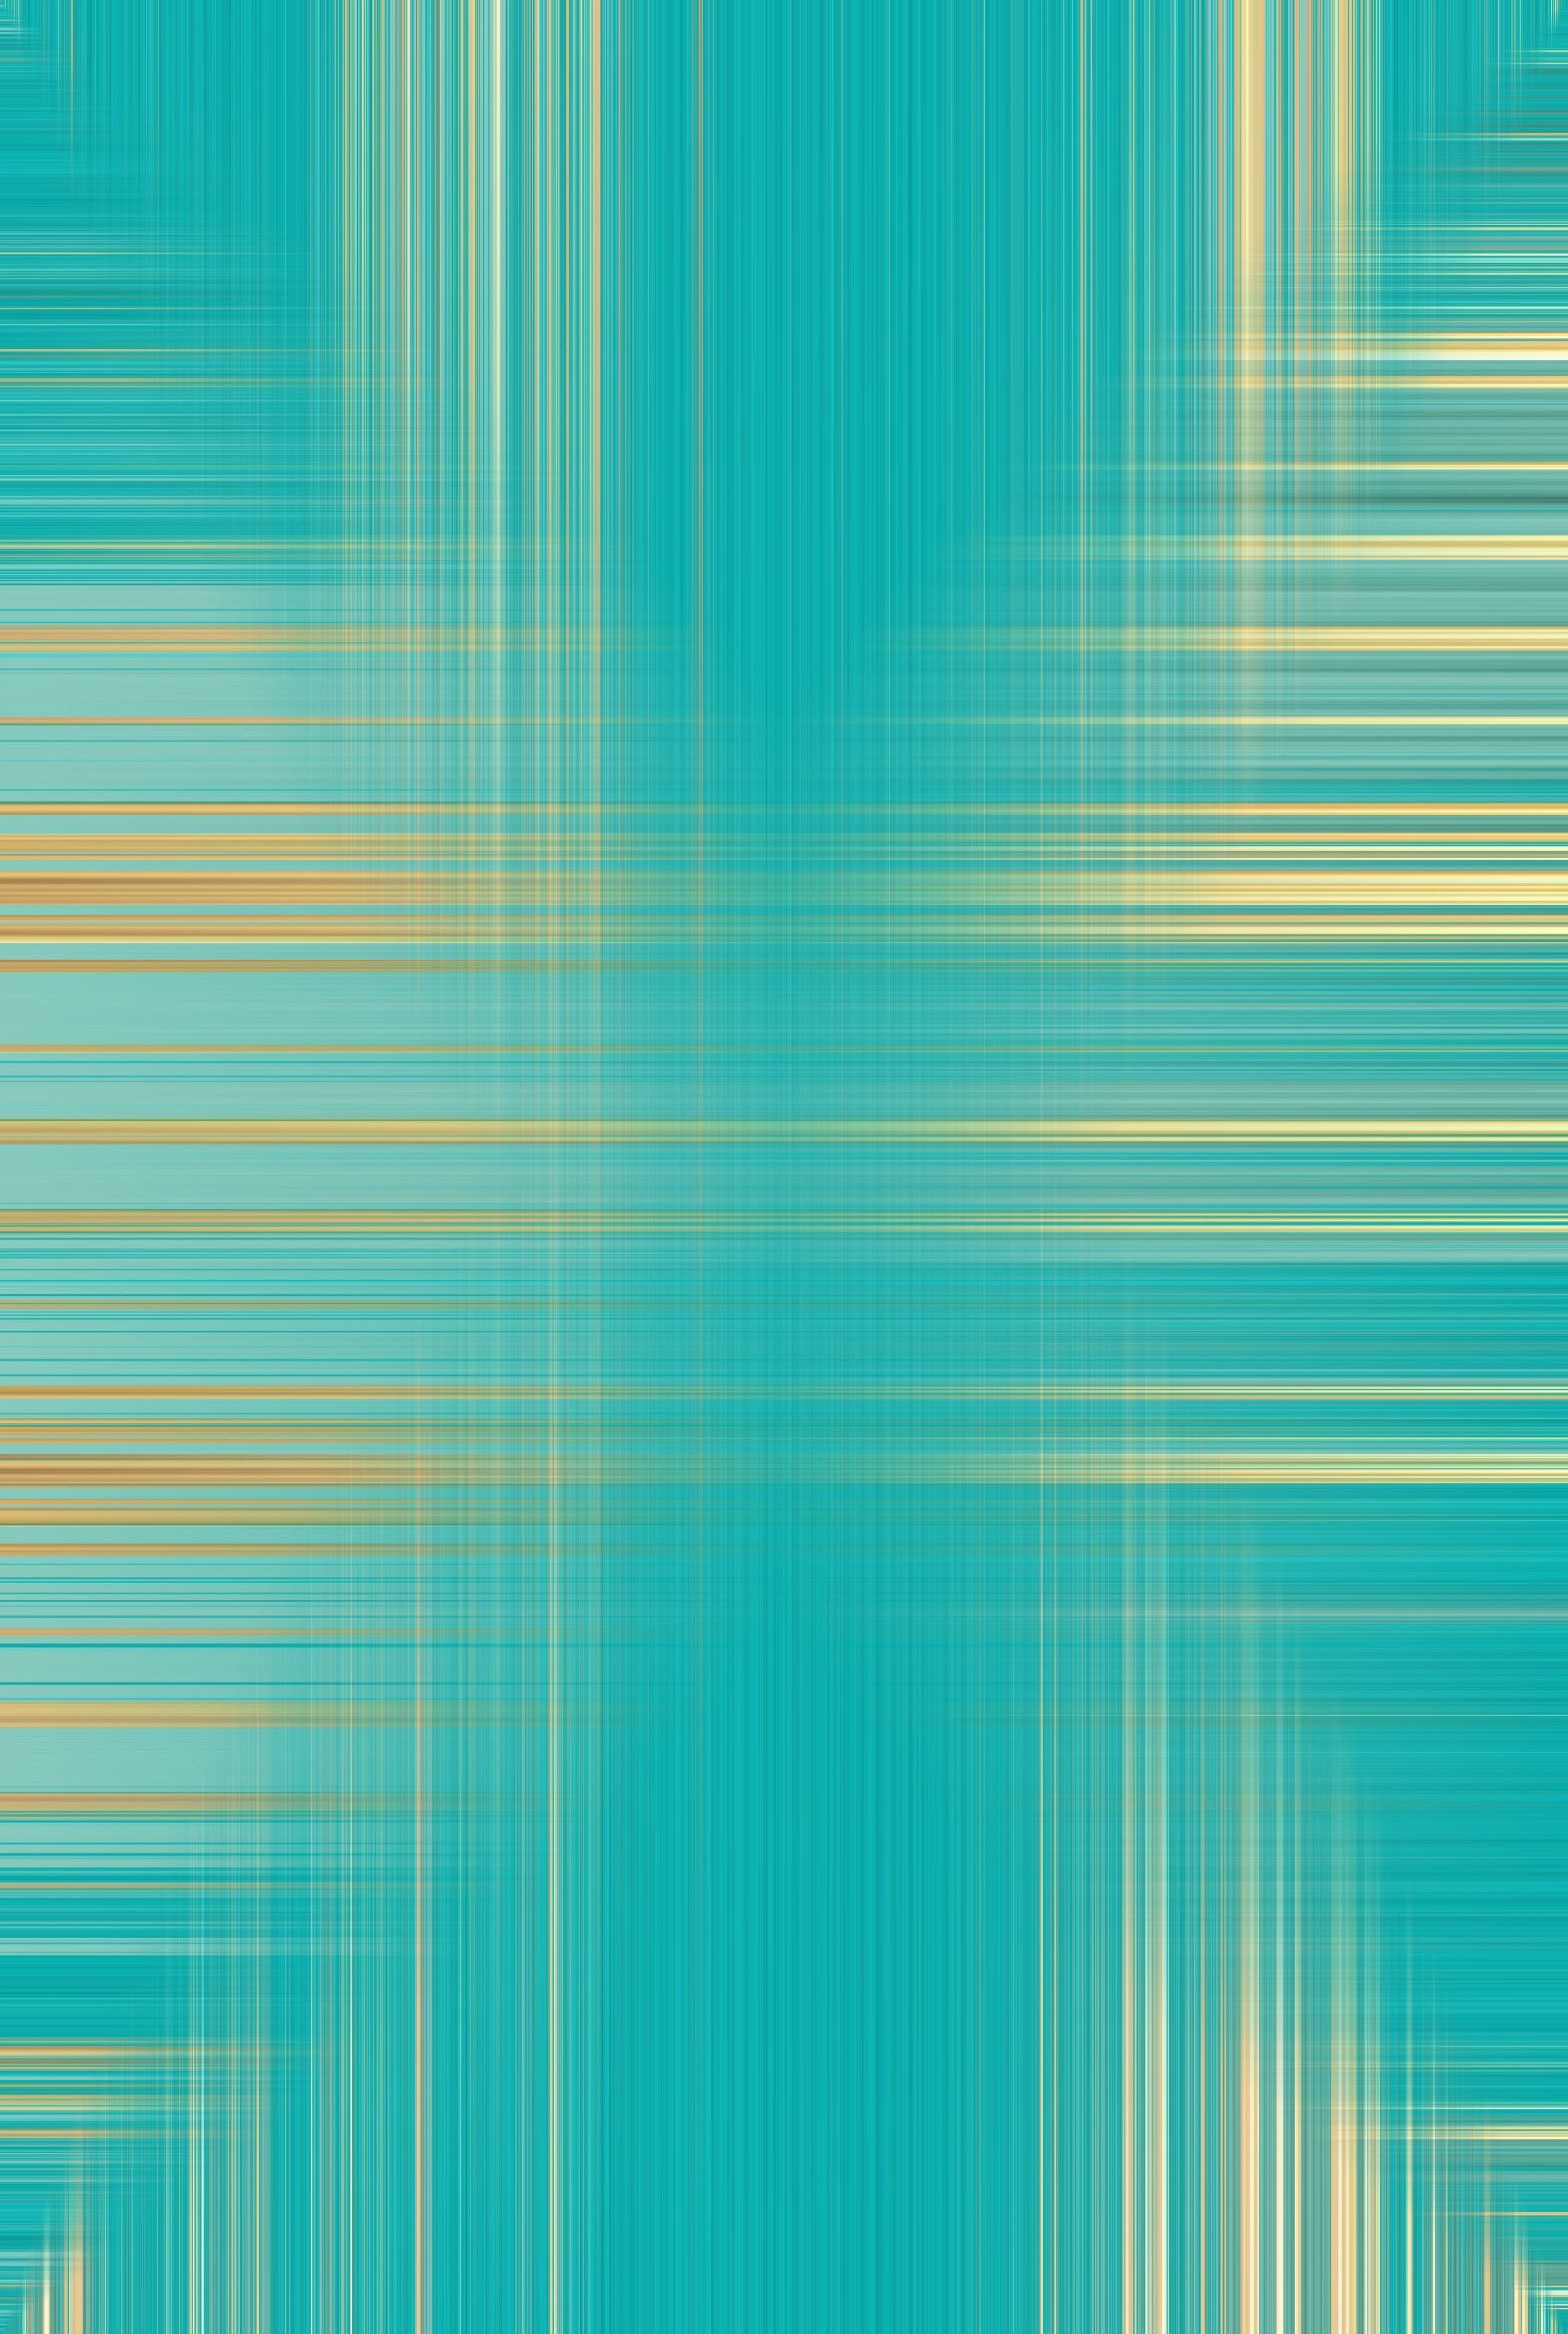 lines, graphics, textures, texture, stripes, turquoise, streaks QHD